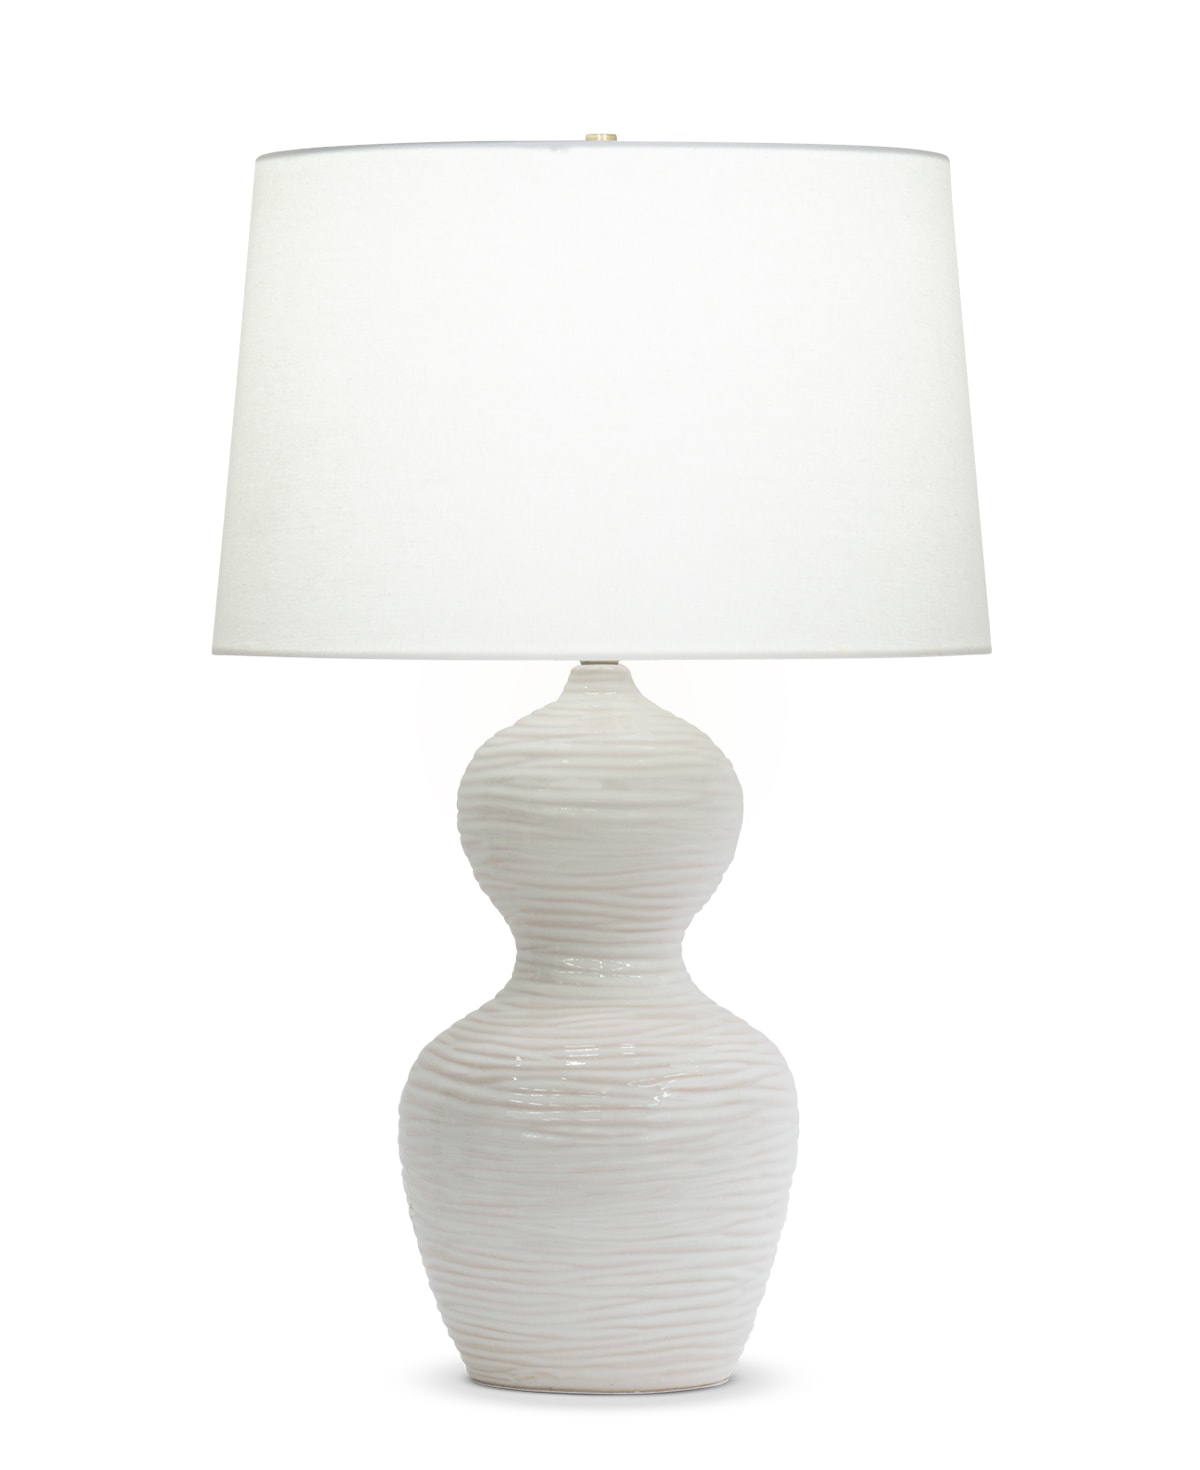 FlowDecor Eloise Table Lamp in ceramic with off-white & sand and off-white linen tapered drum shade (# 4573)